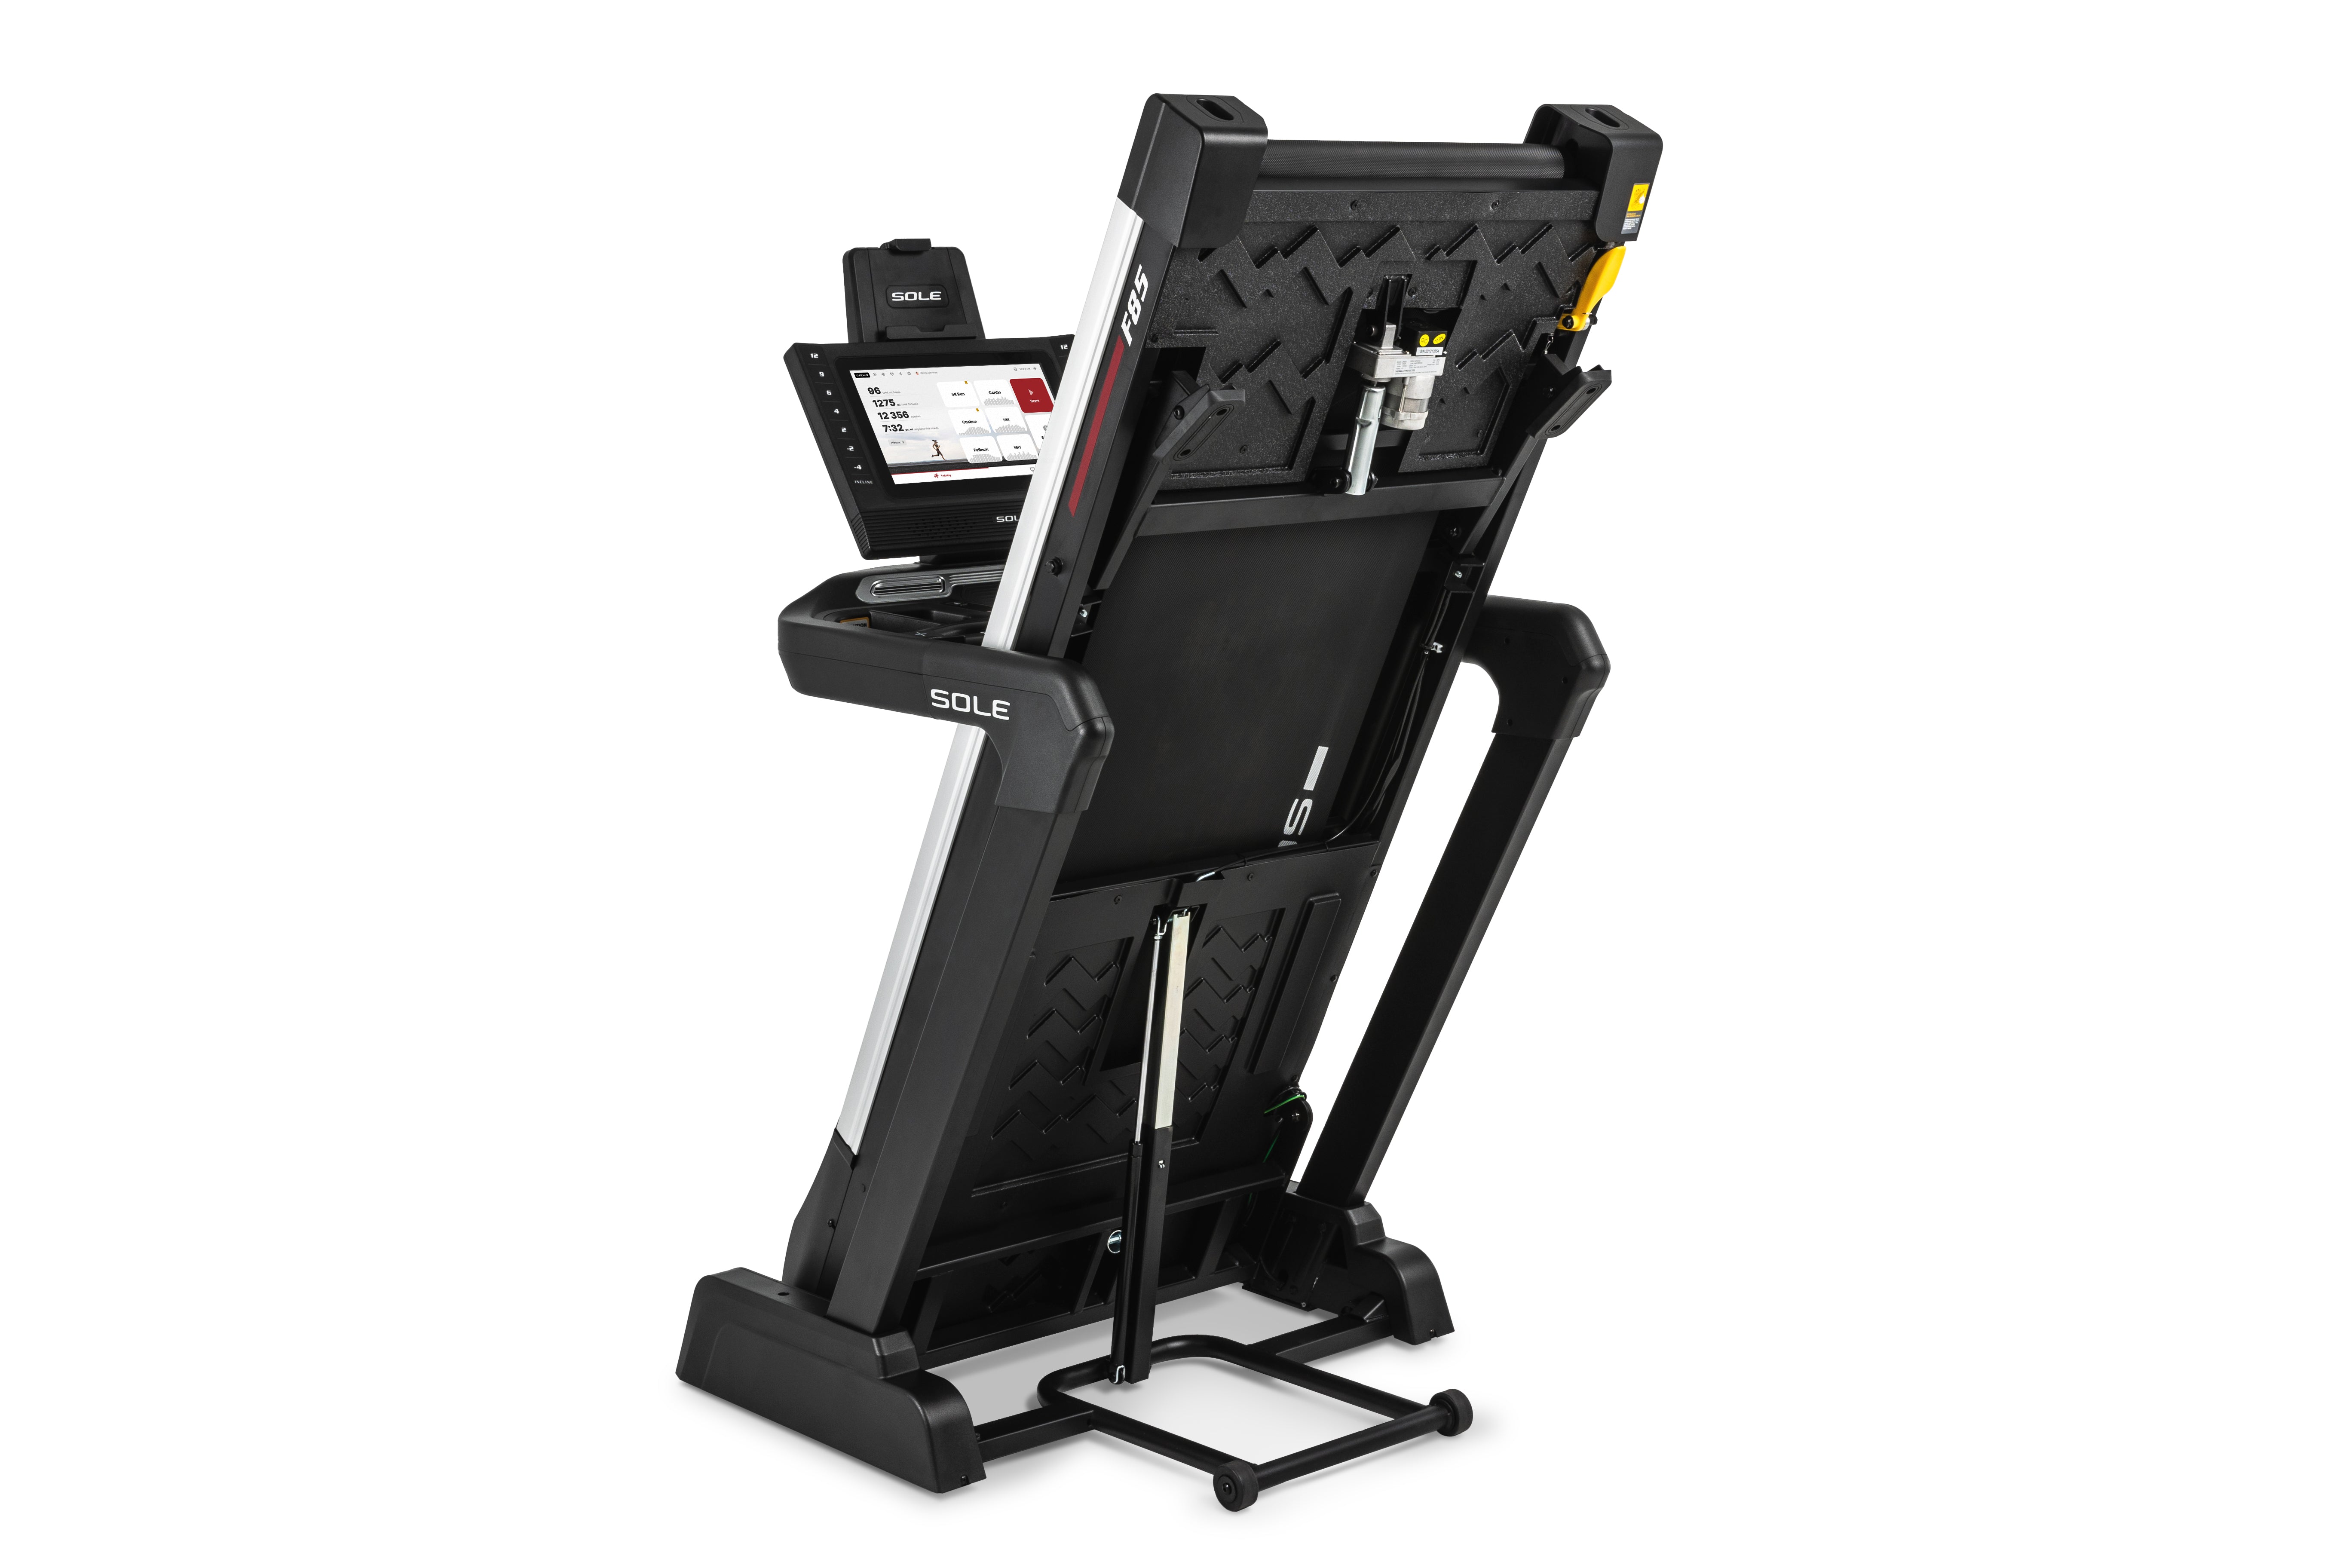 Sole F85 treadmill in a folded upright position, displaying its black textured underside, hydraulic folding mechanism, and front-mounted wheels for mobility. The side panel includes the SOLE logo and a control panel with a digital display is visible on the top right.